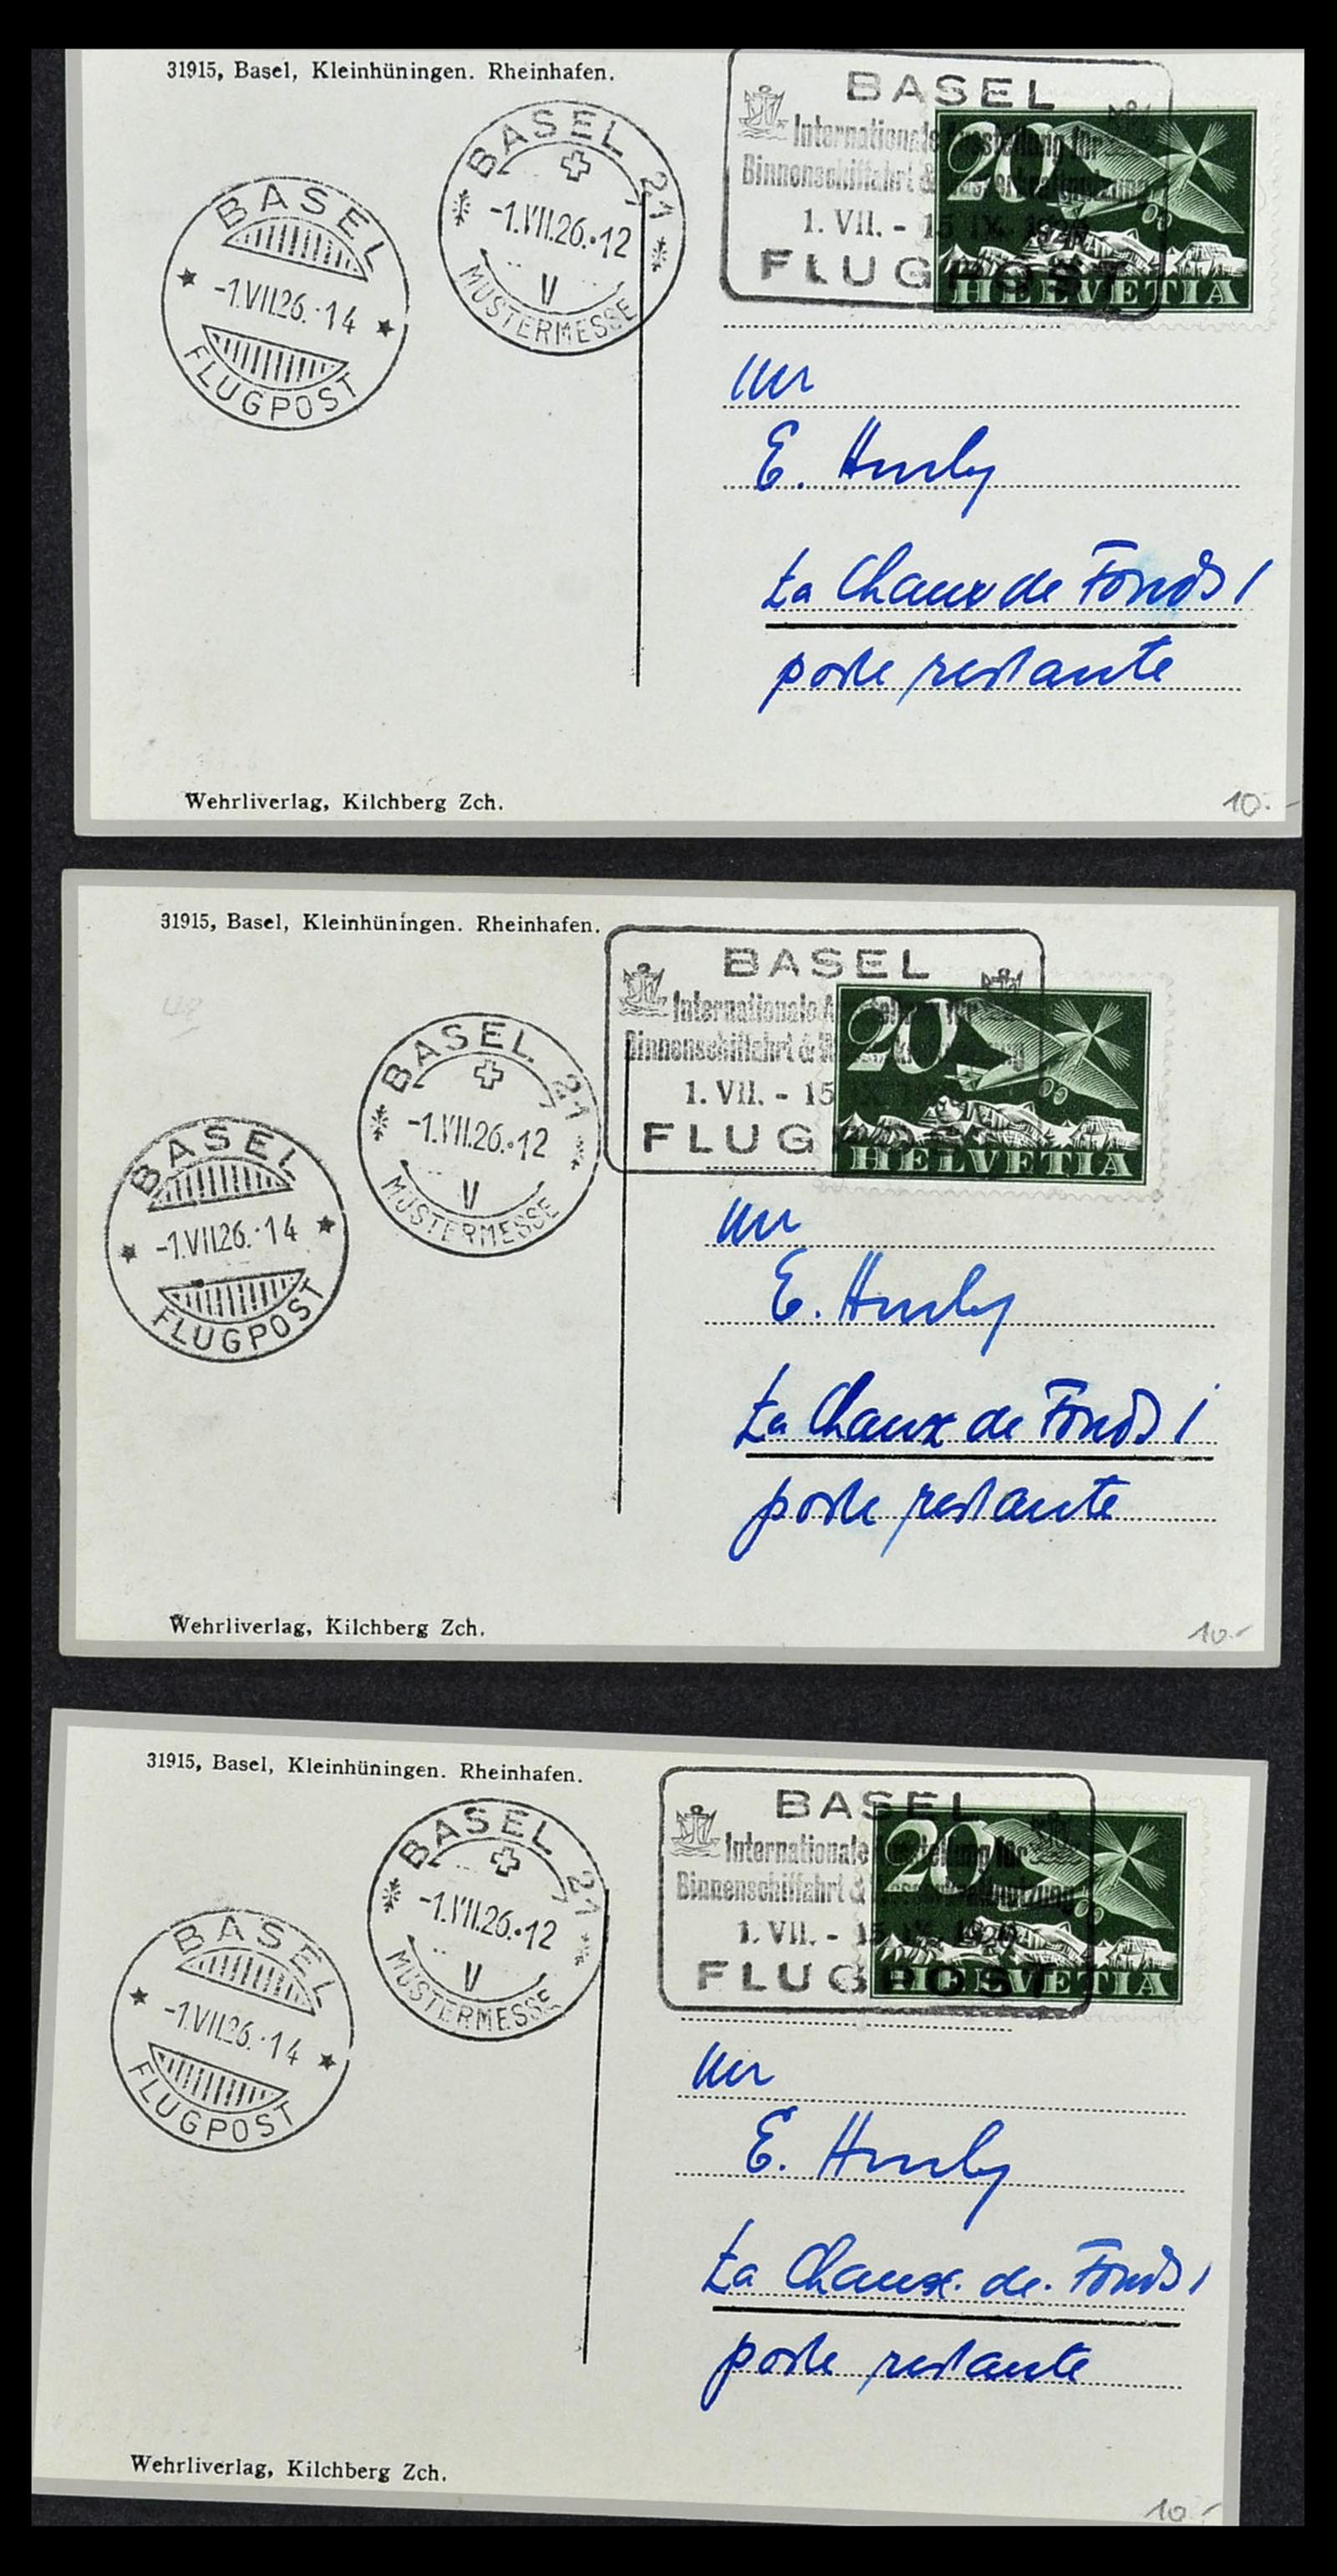 34141 051 - Stamp collection 34141 Switzerland airmail covers 1920-1960.